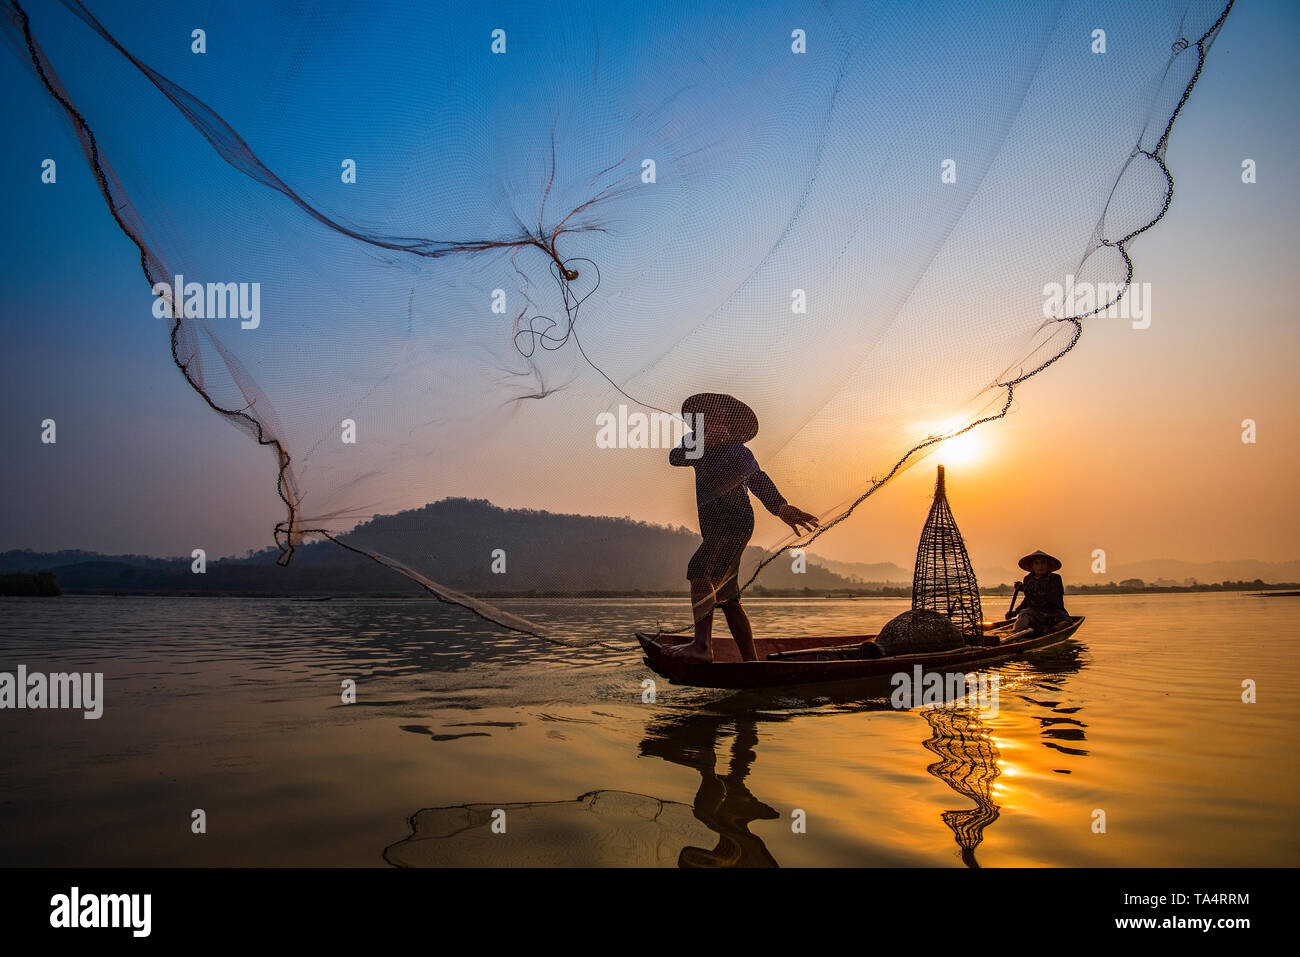 Fisherman on boat river sunset / Asia fisherman net using on wooden boat  casting net sunset or sunrise in the Mekong river - Silhouette fisherman  boat Stock Photo - Alamy